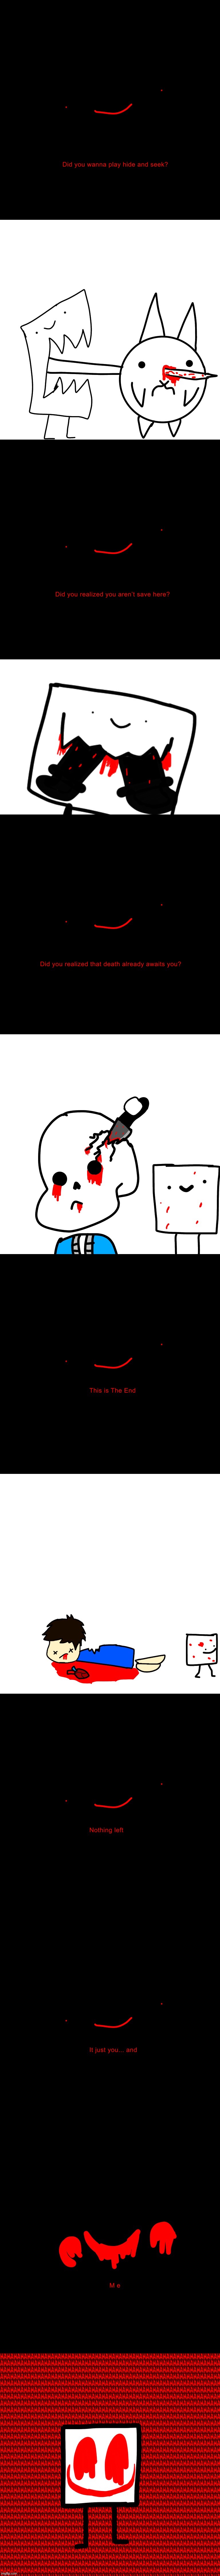 Murderous murder cube go commits genocides on his friends | image tagged in drawings | made w/ Imgflip meme maker